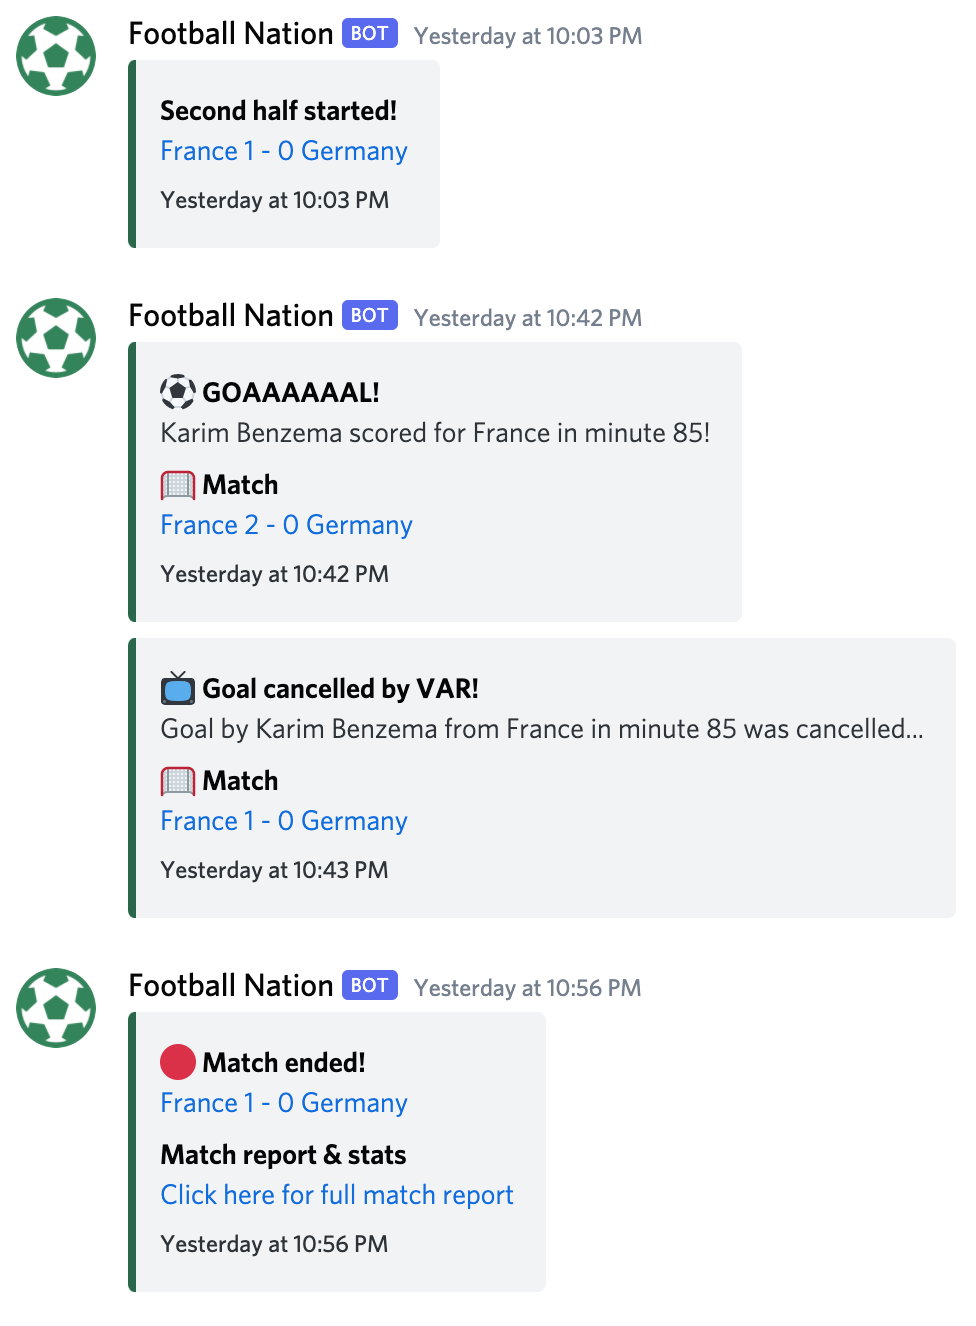 Football Nation bot live score example